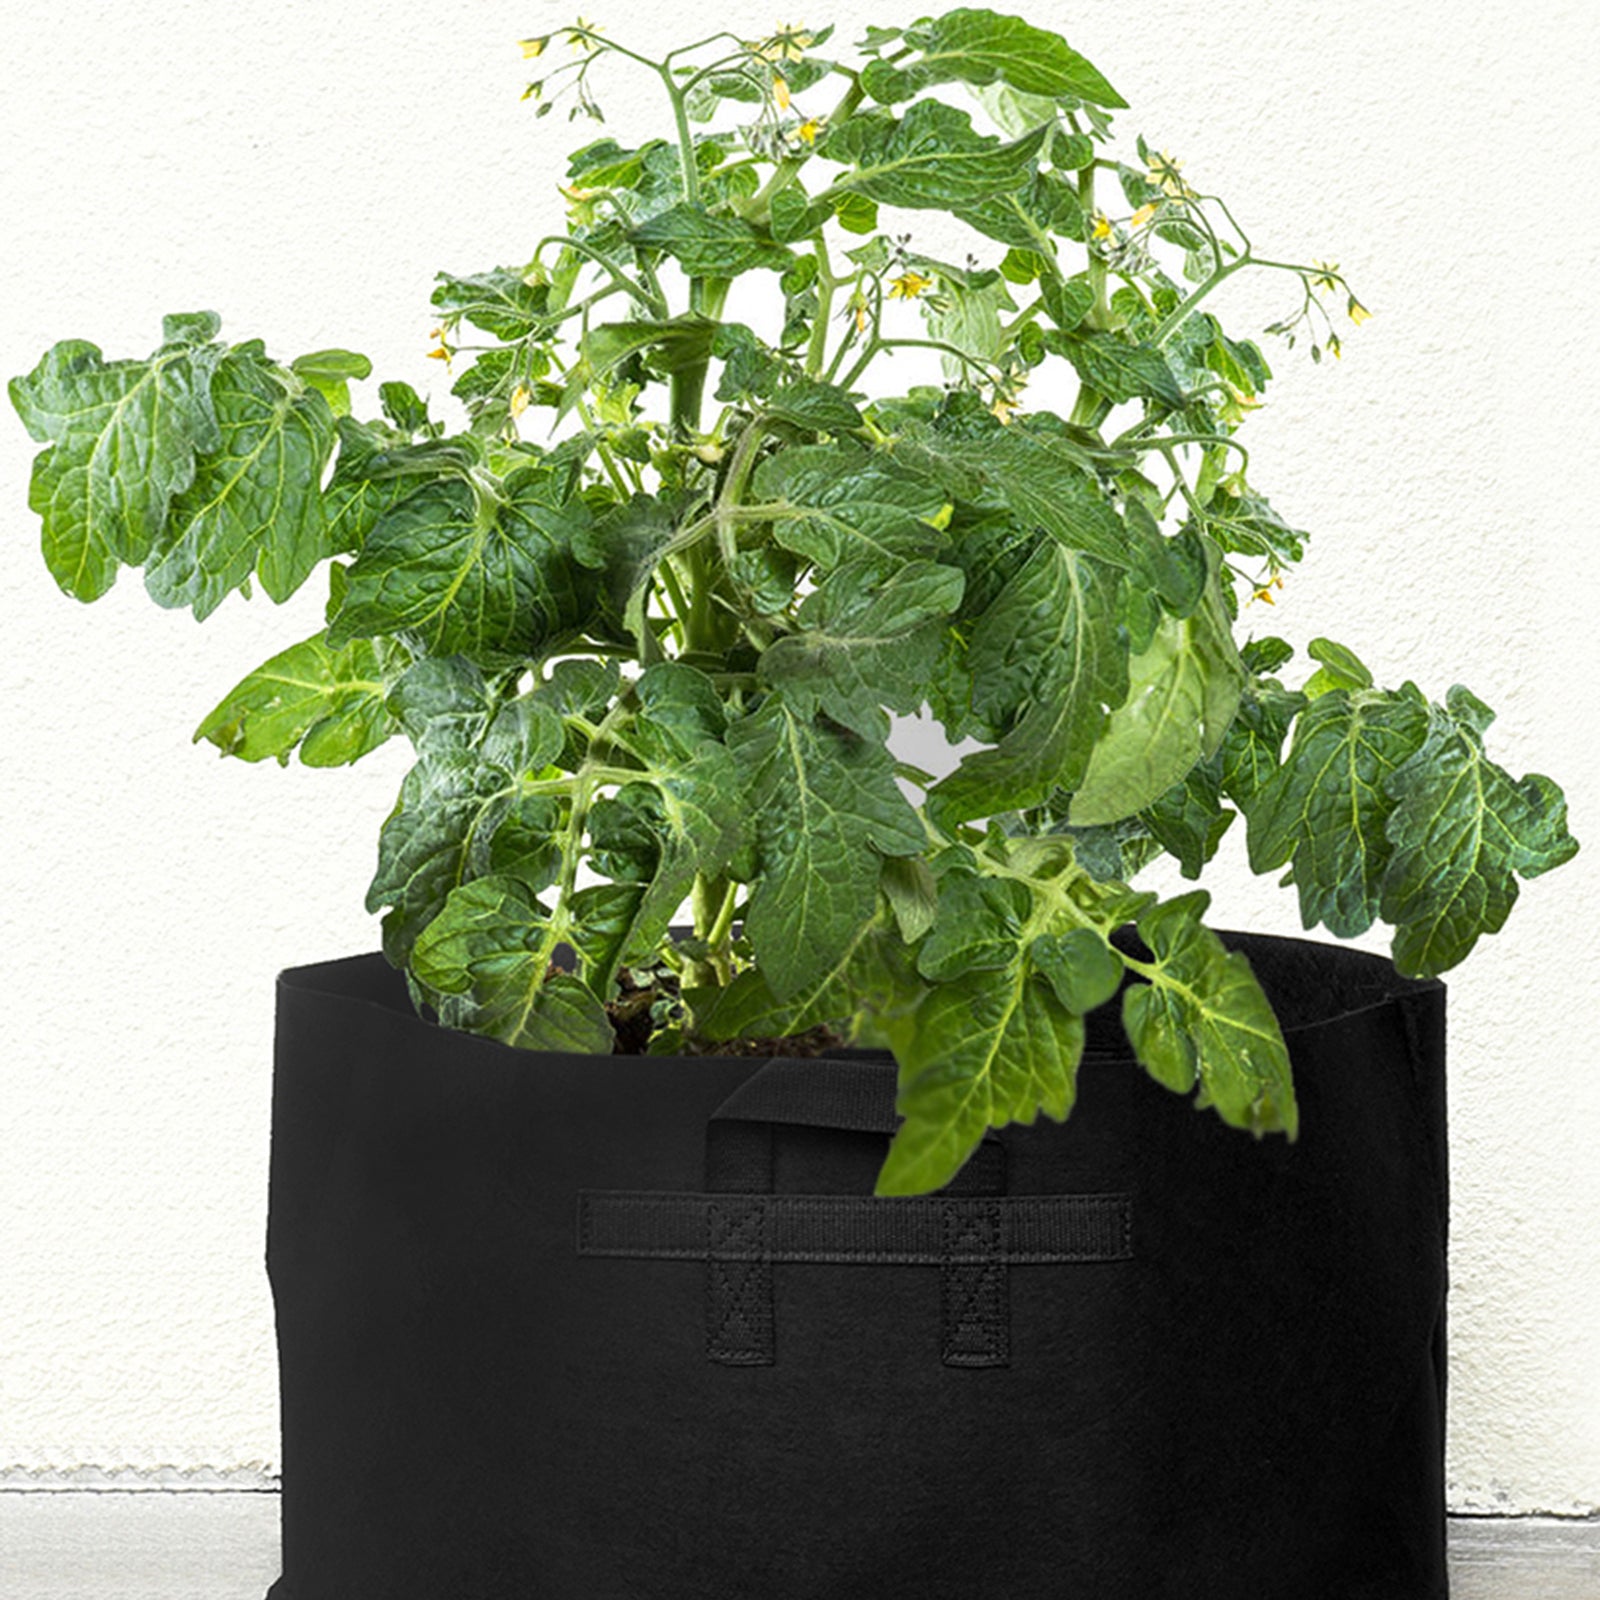 LDPE Grow Bags - Buy Online with the Best Prices in India